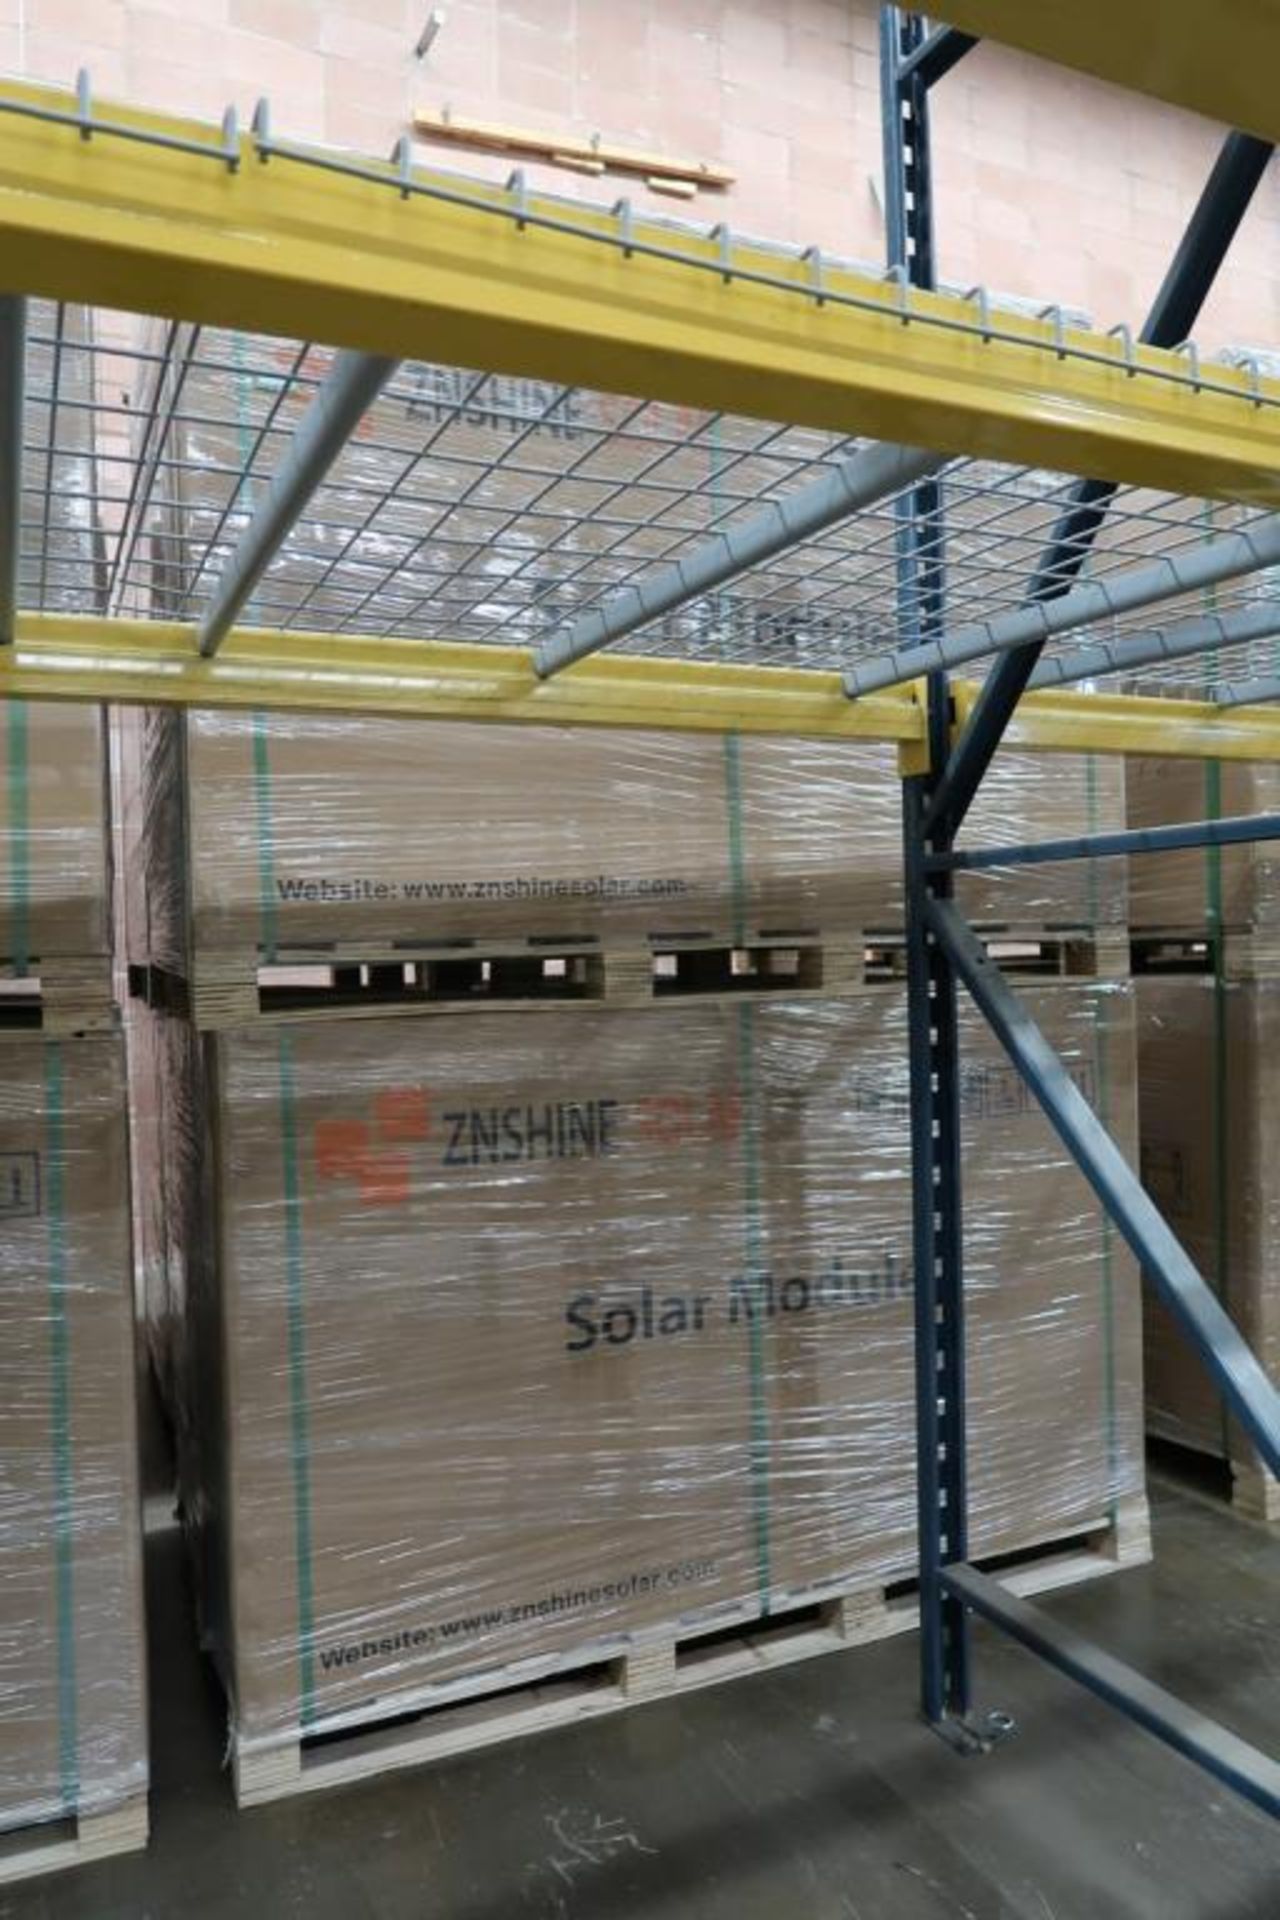 ZNSHINE Pallets of 370W Photovoltaic Solar Panels - Image 2 of 2